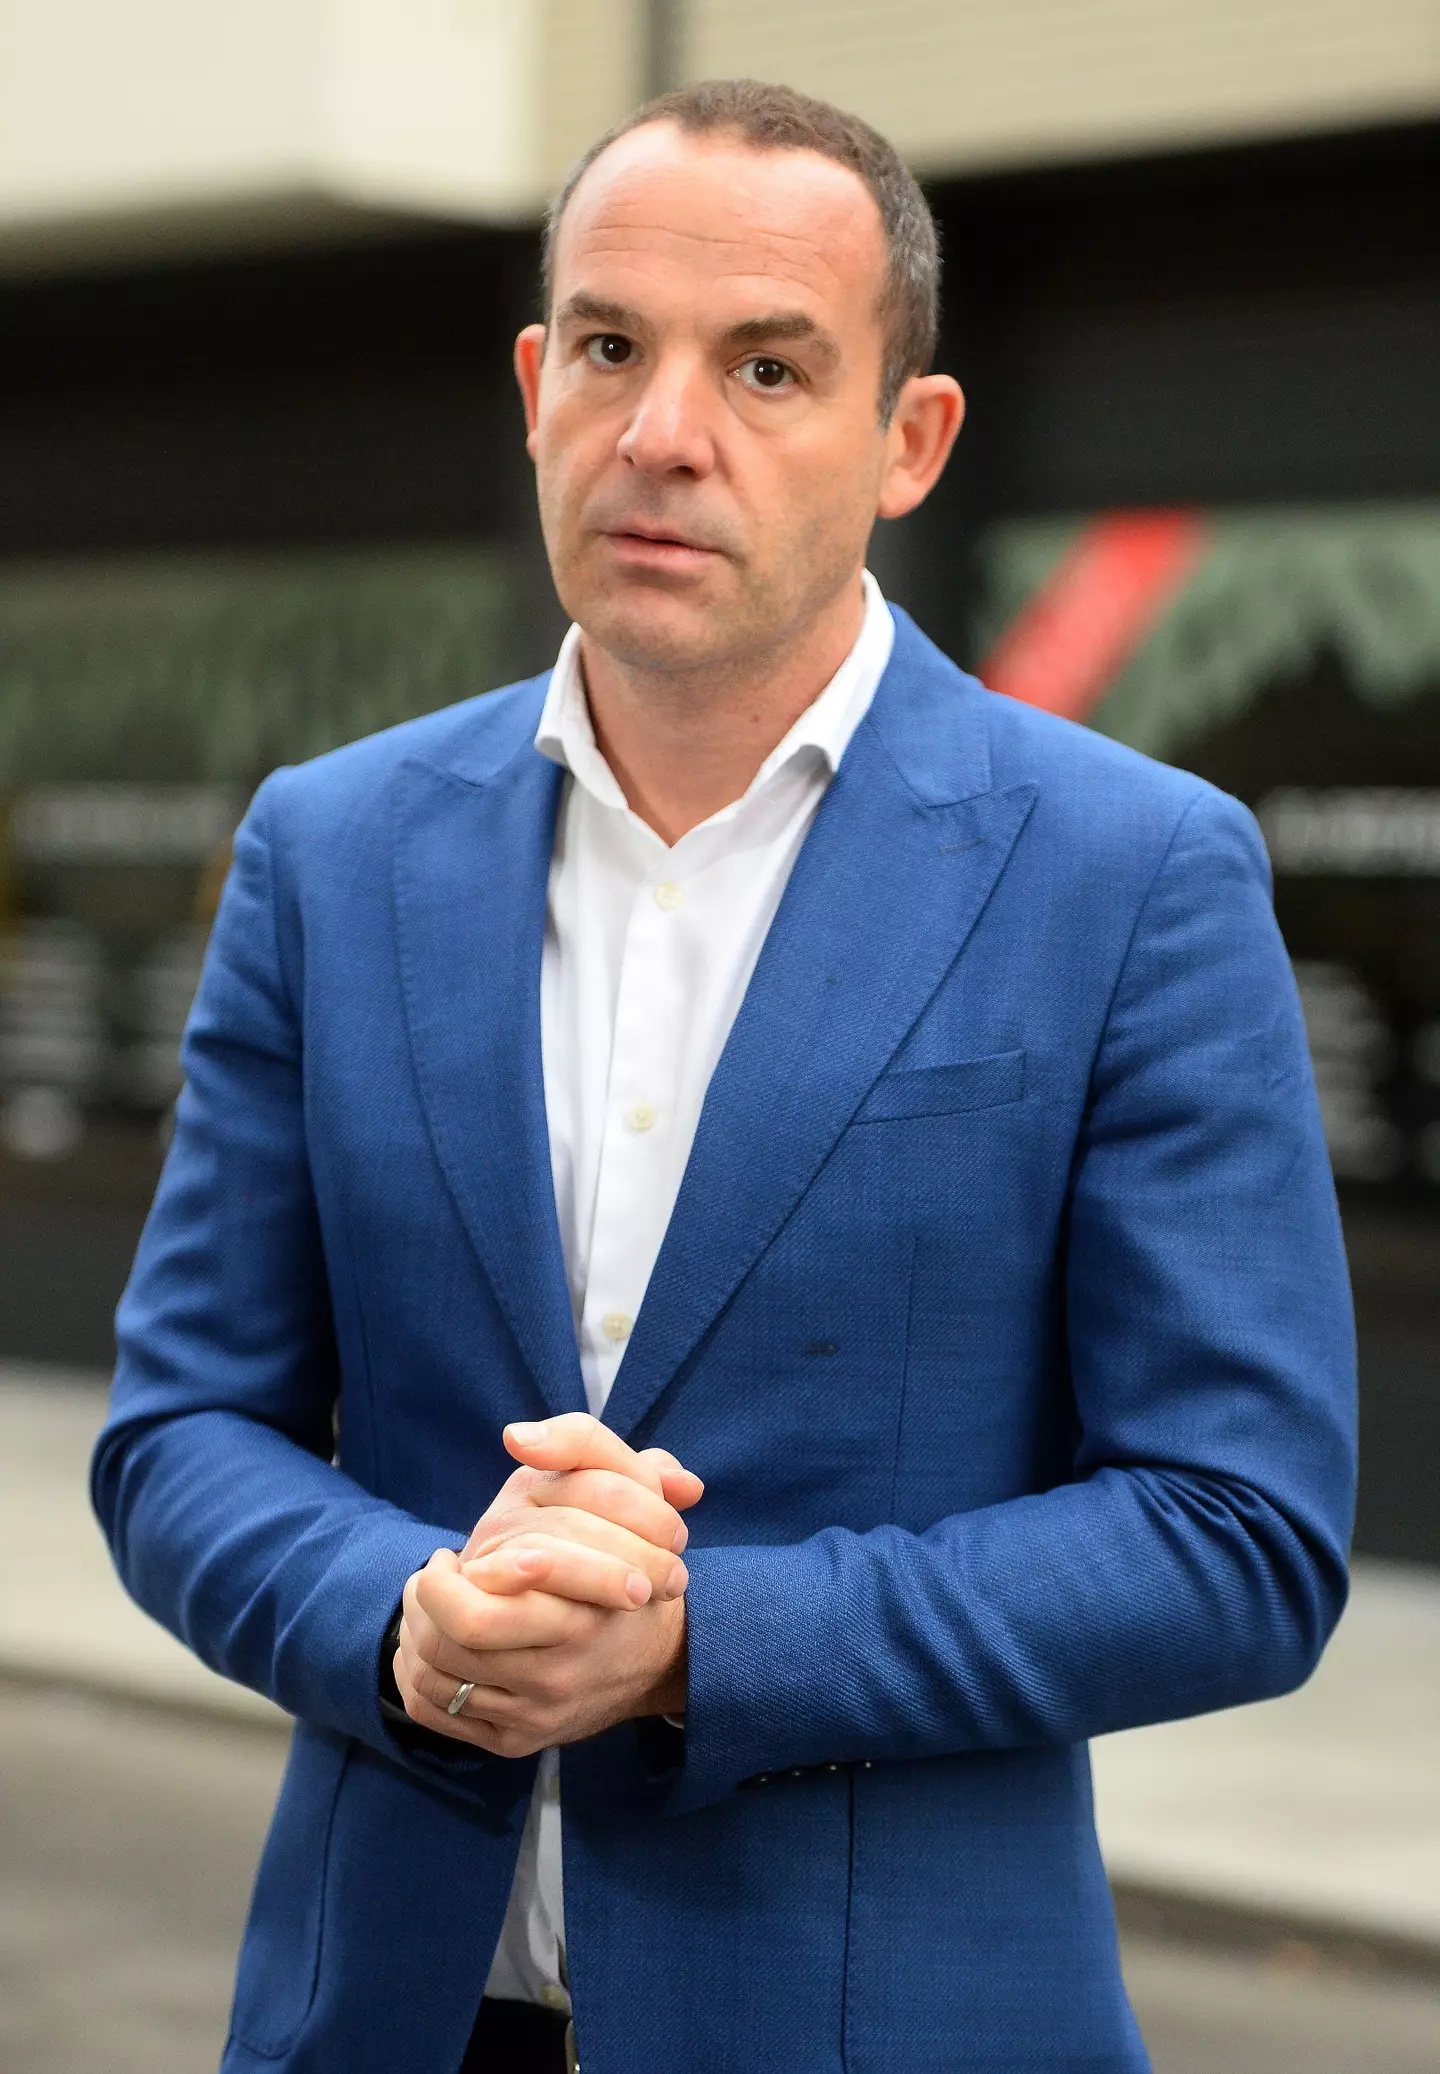 Martin Lewis has issued a warning to Sky TV customers.